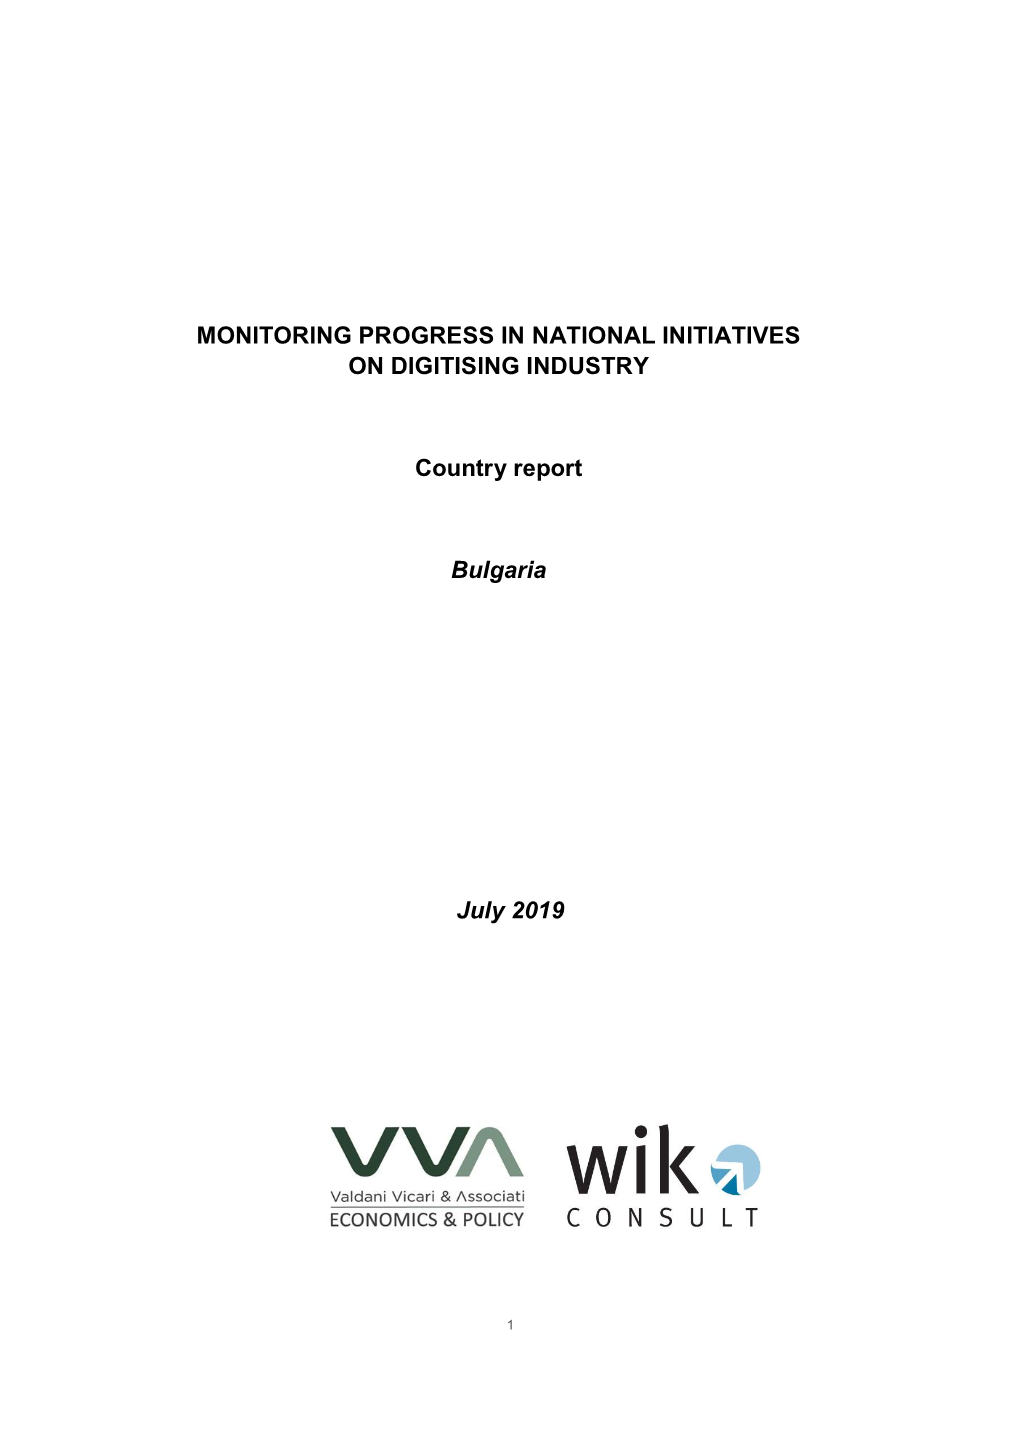 July 2019 MONITORING PROGRESS in NATIONAL INITIATIVES ON